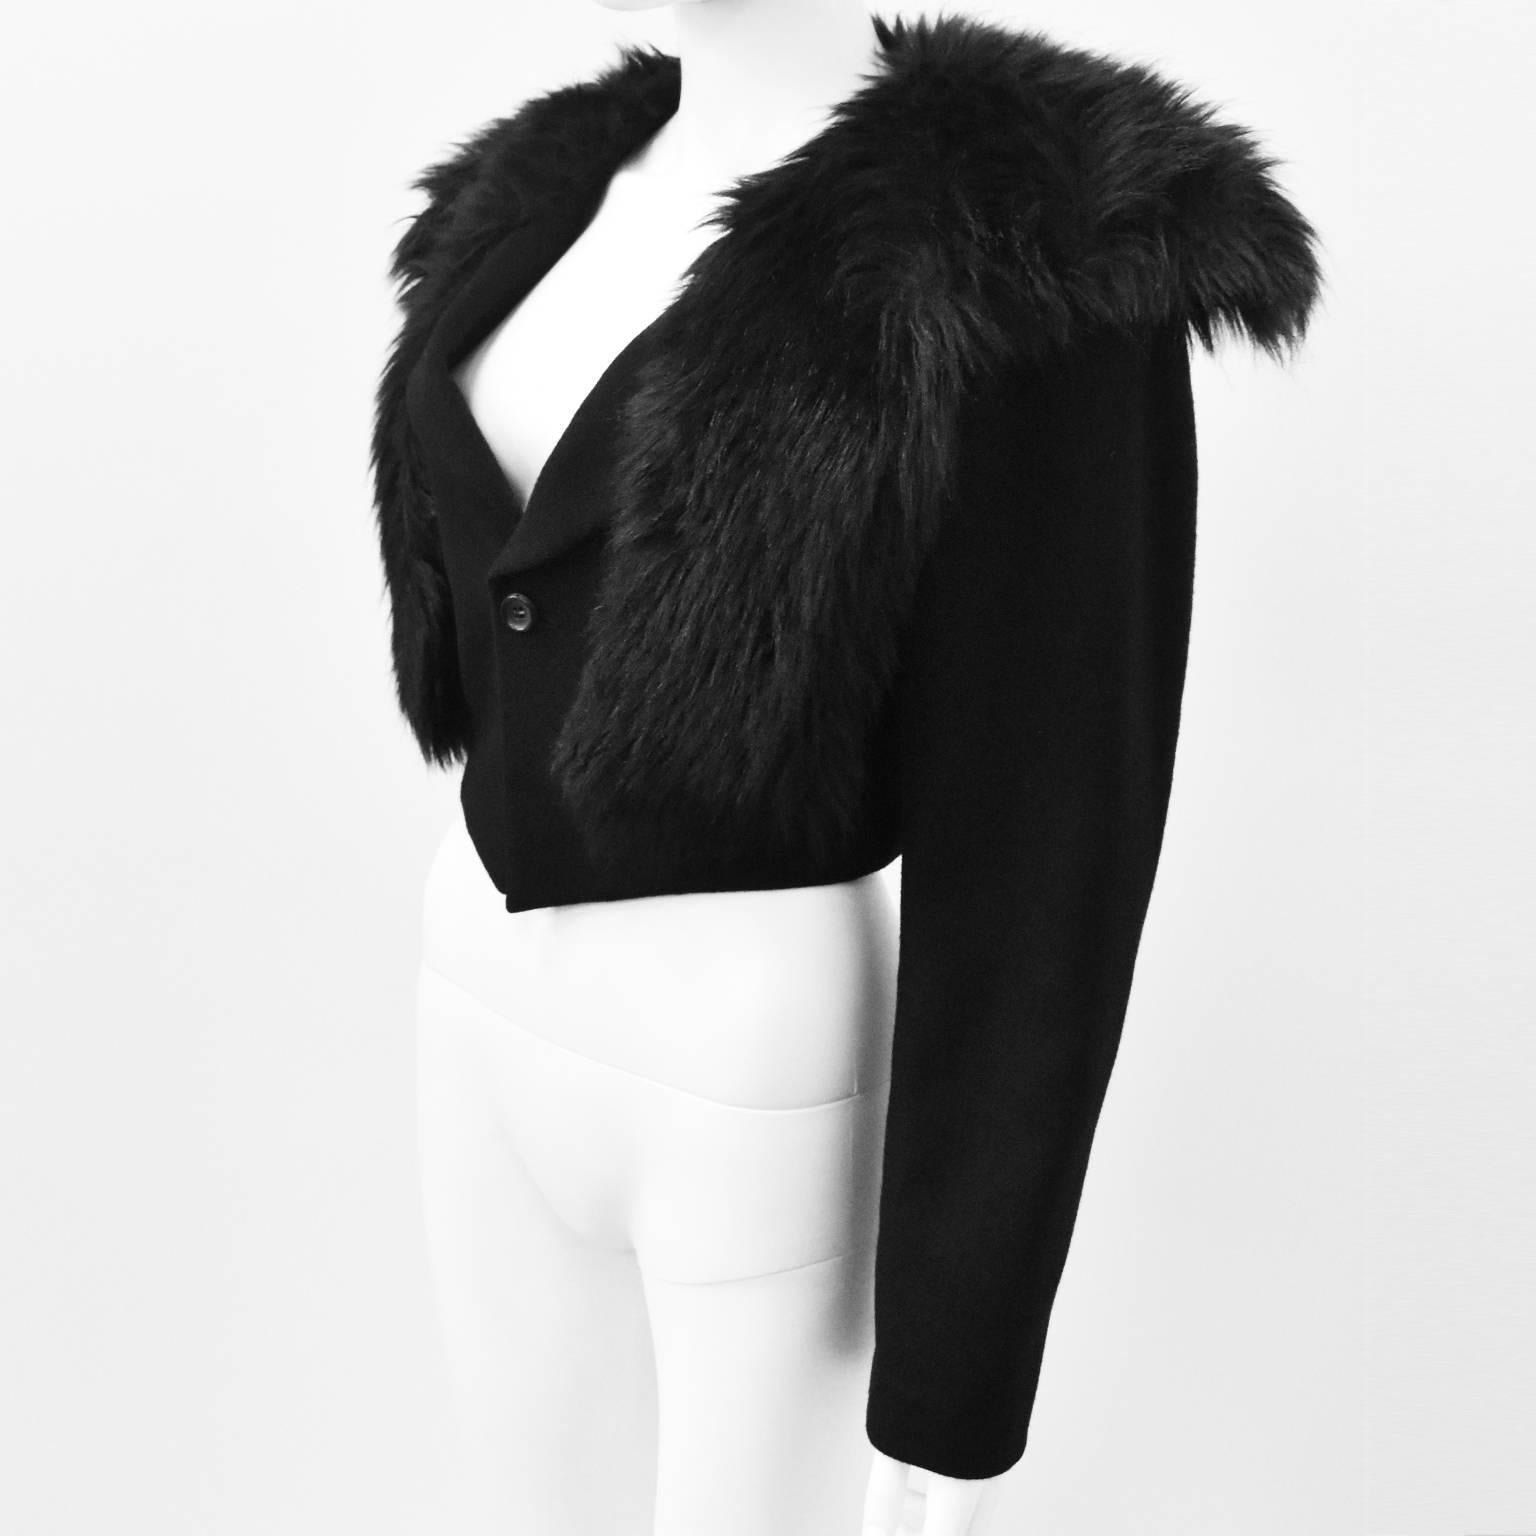 An elegant black cropped jacket with faux fur collar from Comme des Garcons. The jacket has long sleeves, v-neck, button fastening, cropped length that falls to the waist and pointed ends. It has an attached faux fur collar/shawl that covers the